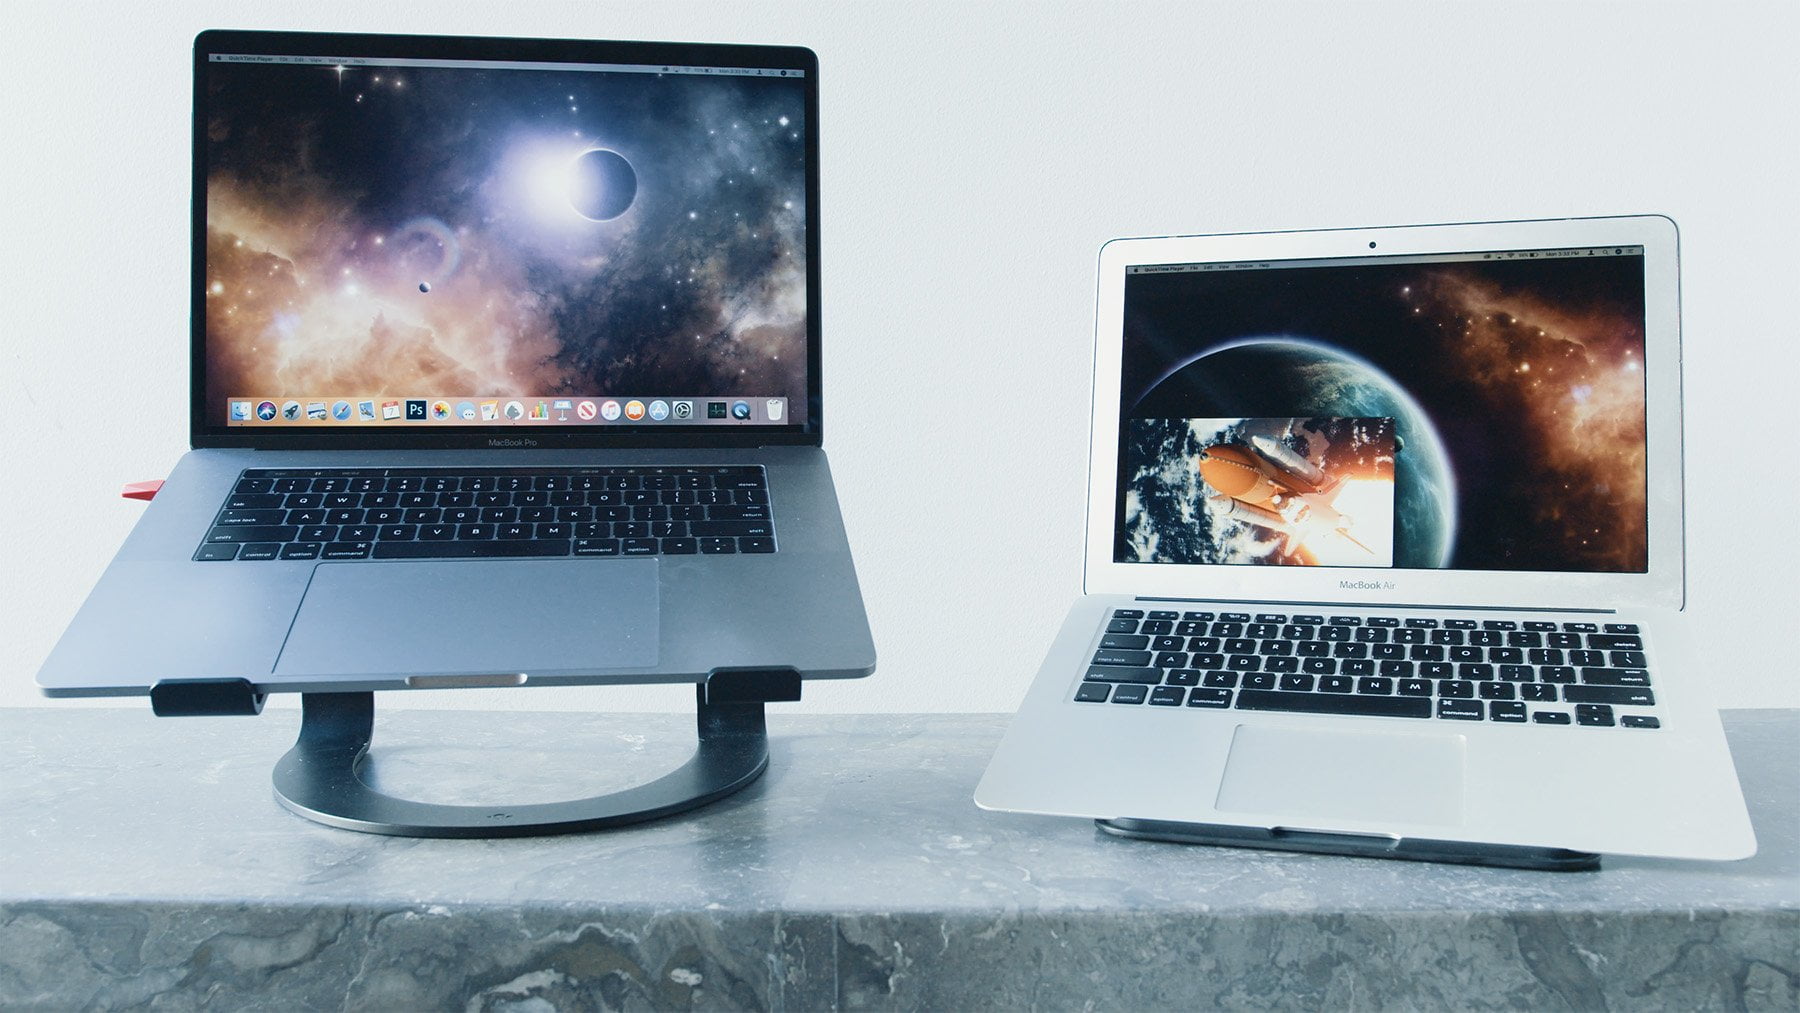 use imac as second monitor for laptop